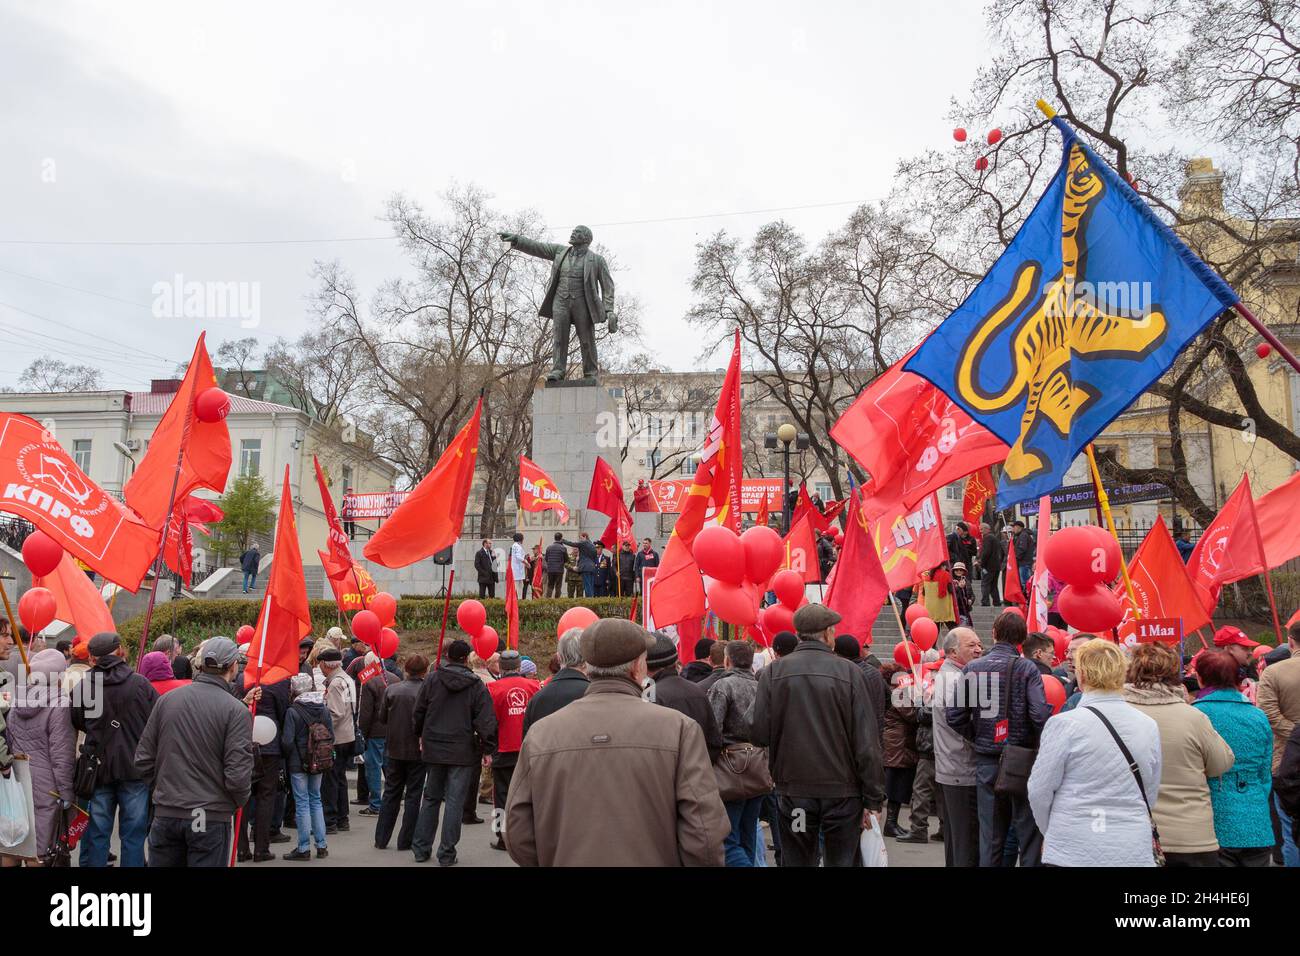 Vladivostok, Russia - May 1, 2016: Meeting of political party of the Communist Party of the Russian Federation at a monument to Lenin. Stock Photo